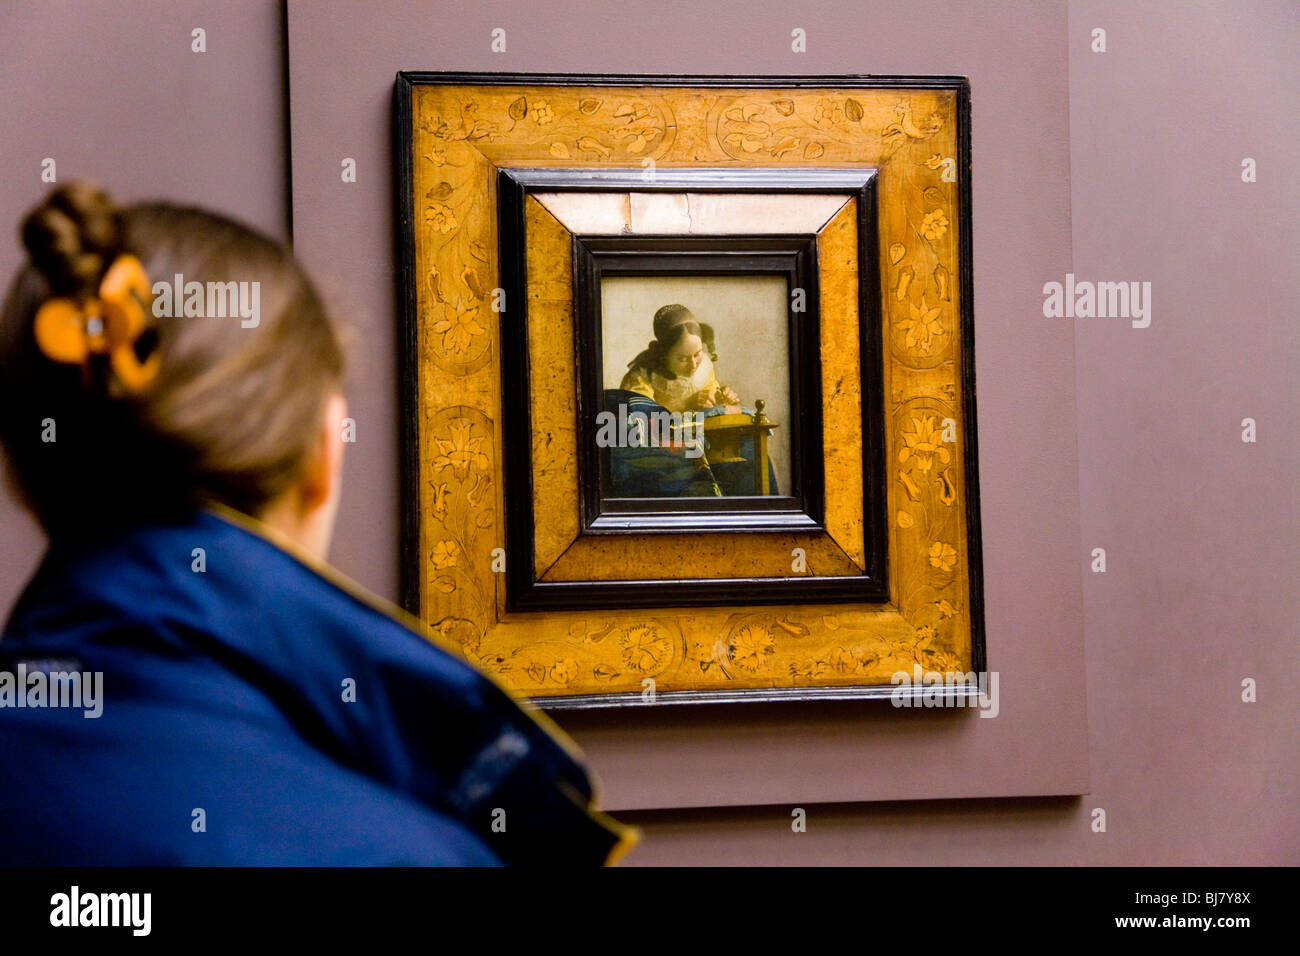 Woman tourist looking at The Lacemaker painting by Vermeer, Jan. The Louvre Museum, Paris. France. Stock Photo